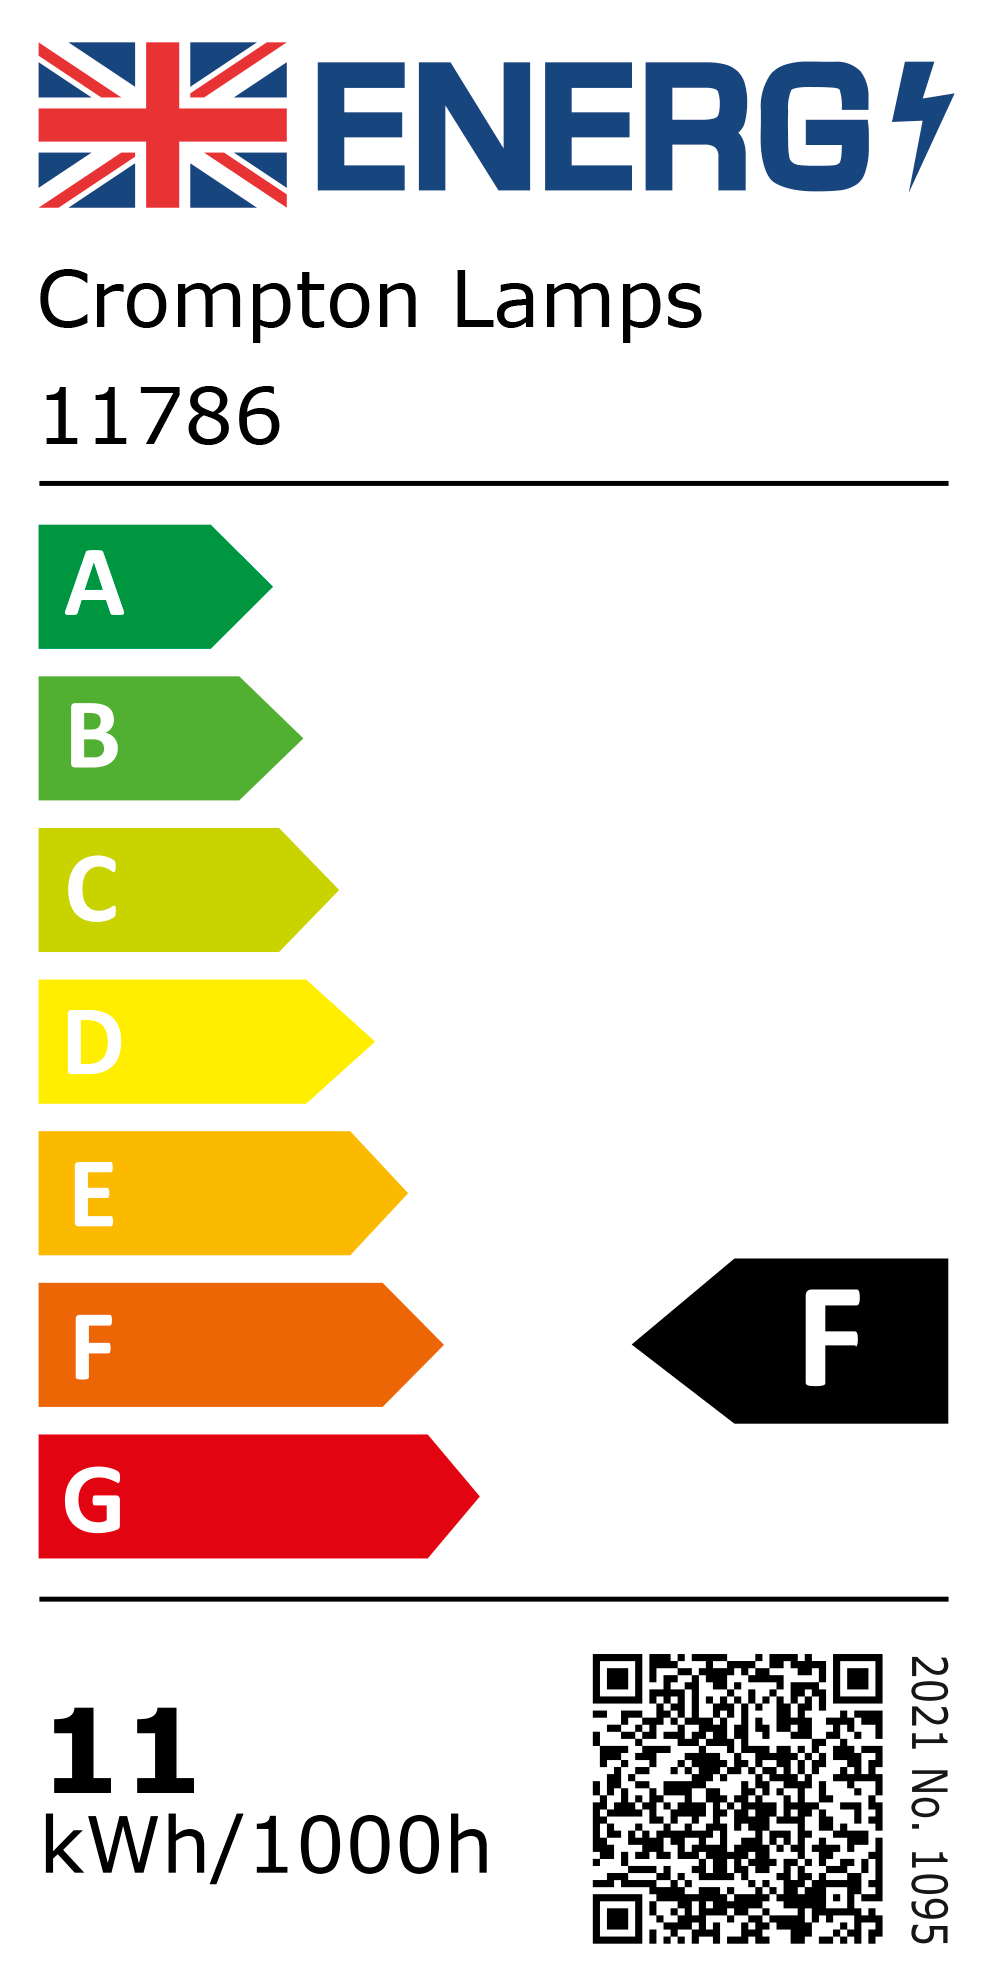 New 2021 Energy Rating Label: Stock Code 11786